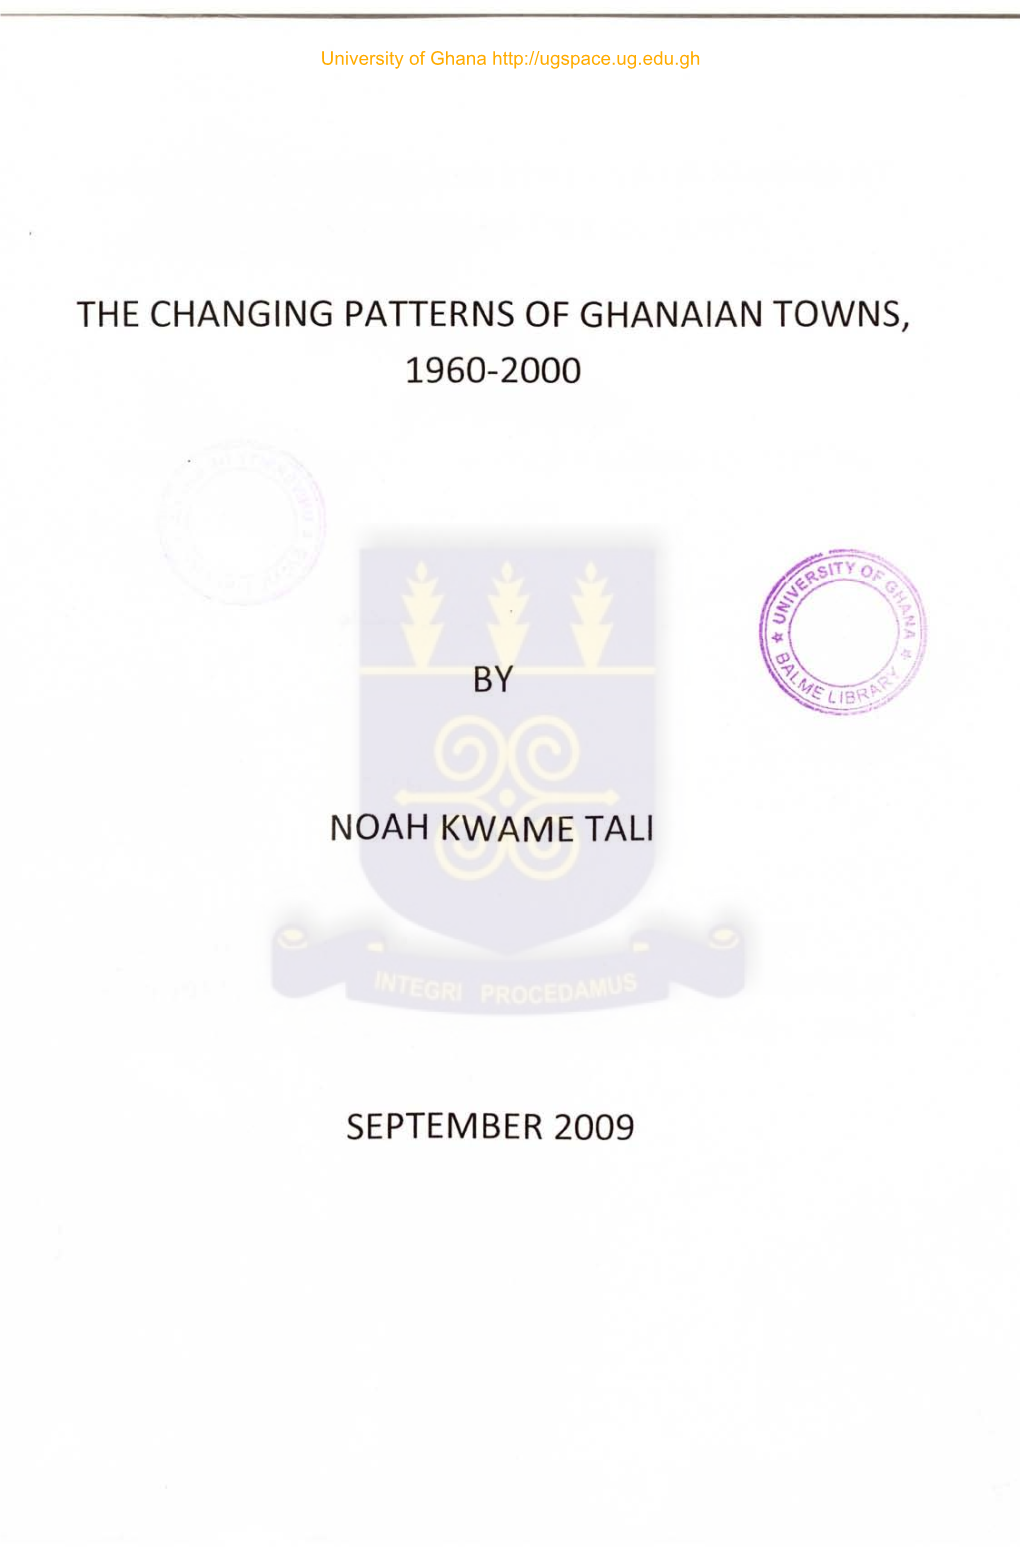 The Changing Patterns of Ghanaian Towns, 1960-2000